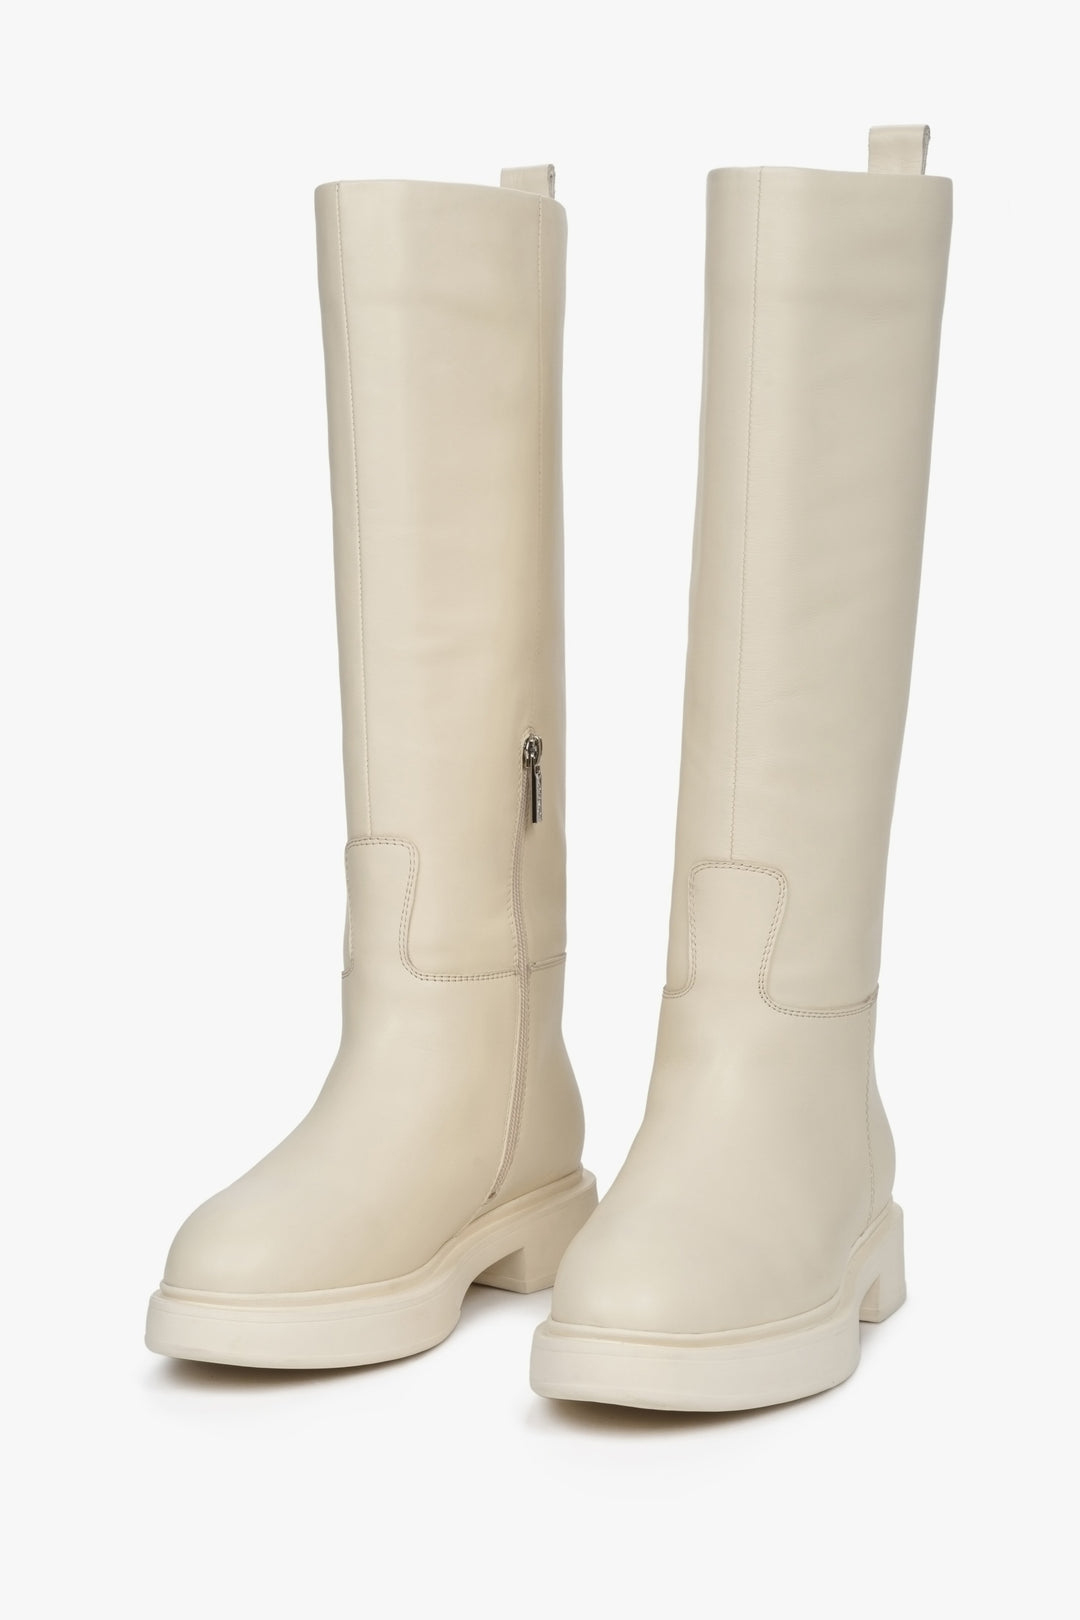 Tall women's boots with insulation by Estro for winter in beige color.